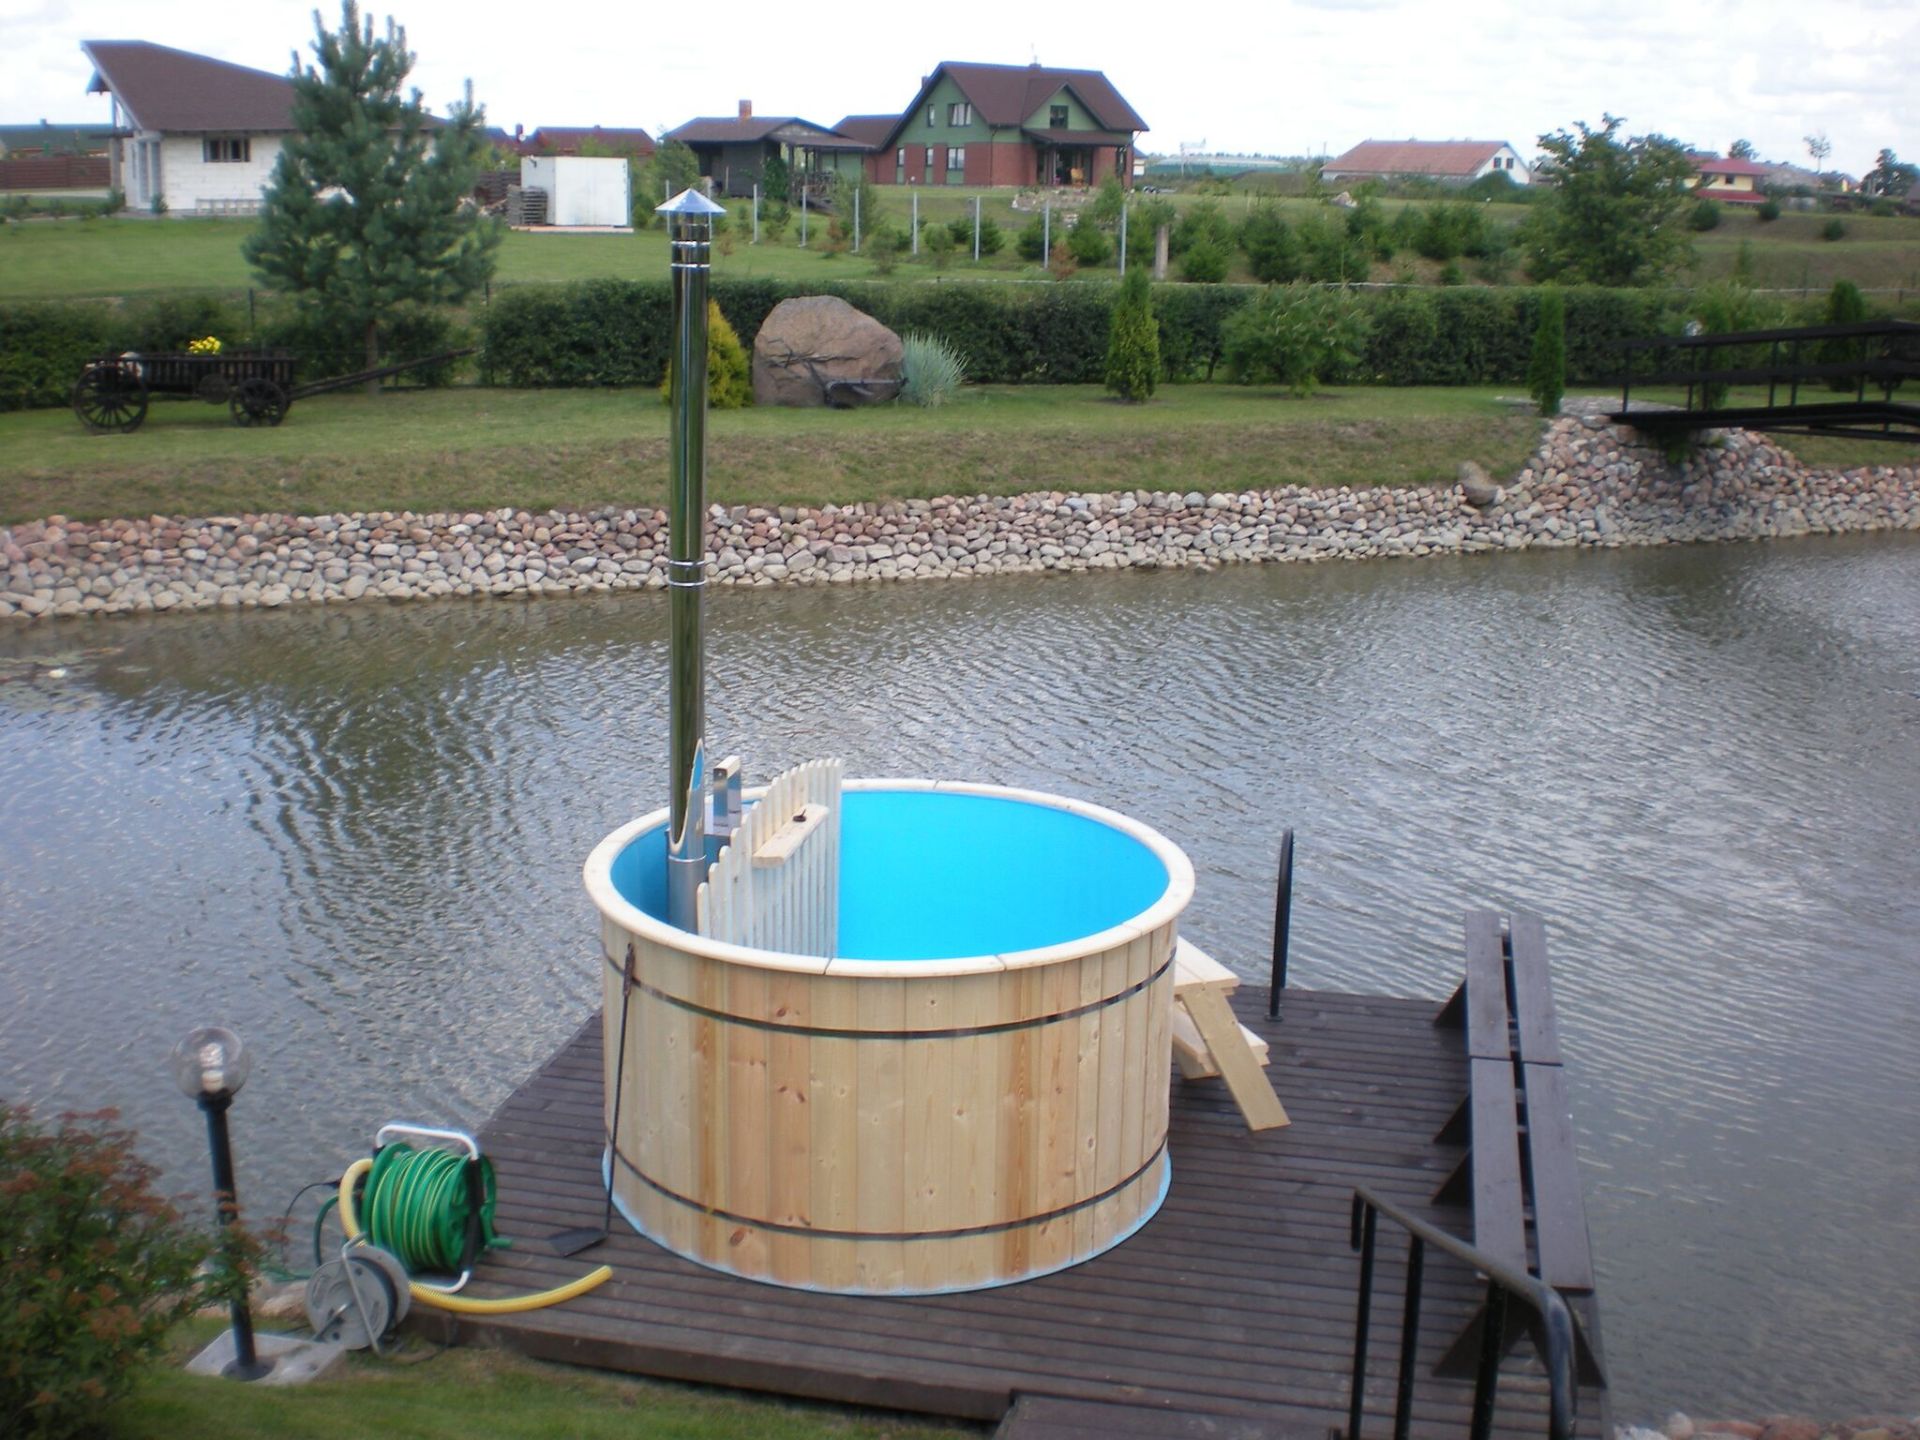 V Brand New 1.5m Polypropylene Hot Tub with Wooden Finishing and Stainless Steel Heater with Chimney